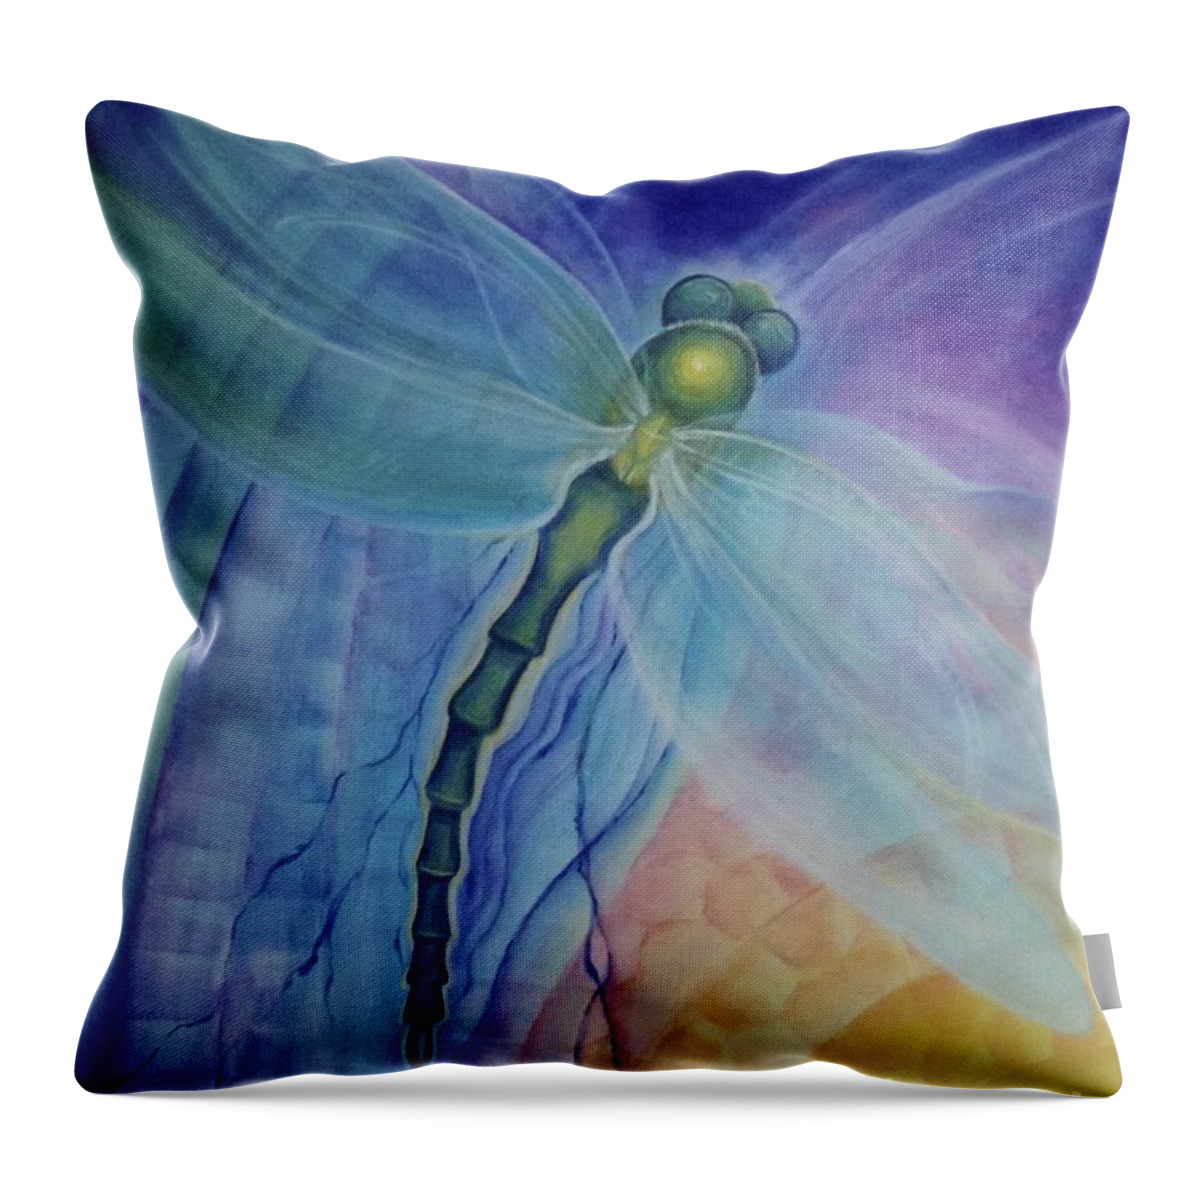 Dragonfly Throw Pillow featuring the painting Light Healer by Kristine Izak